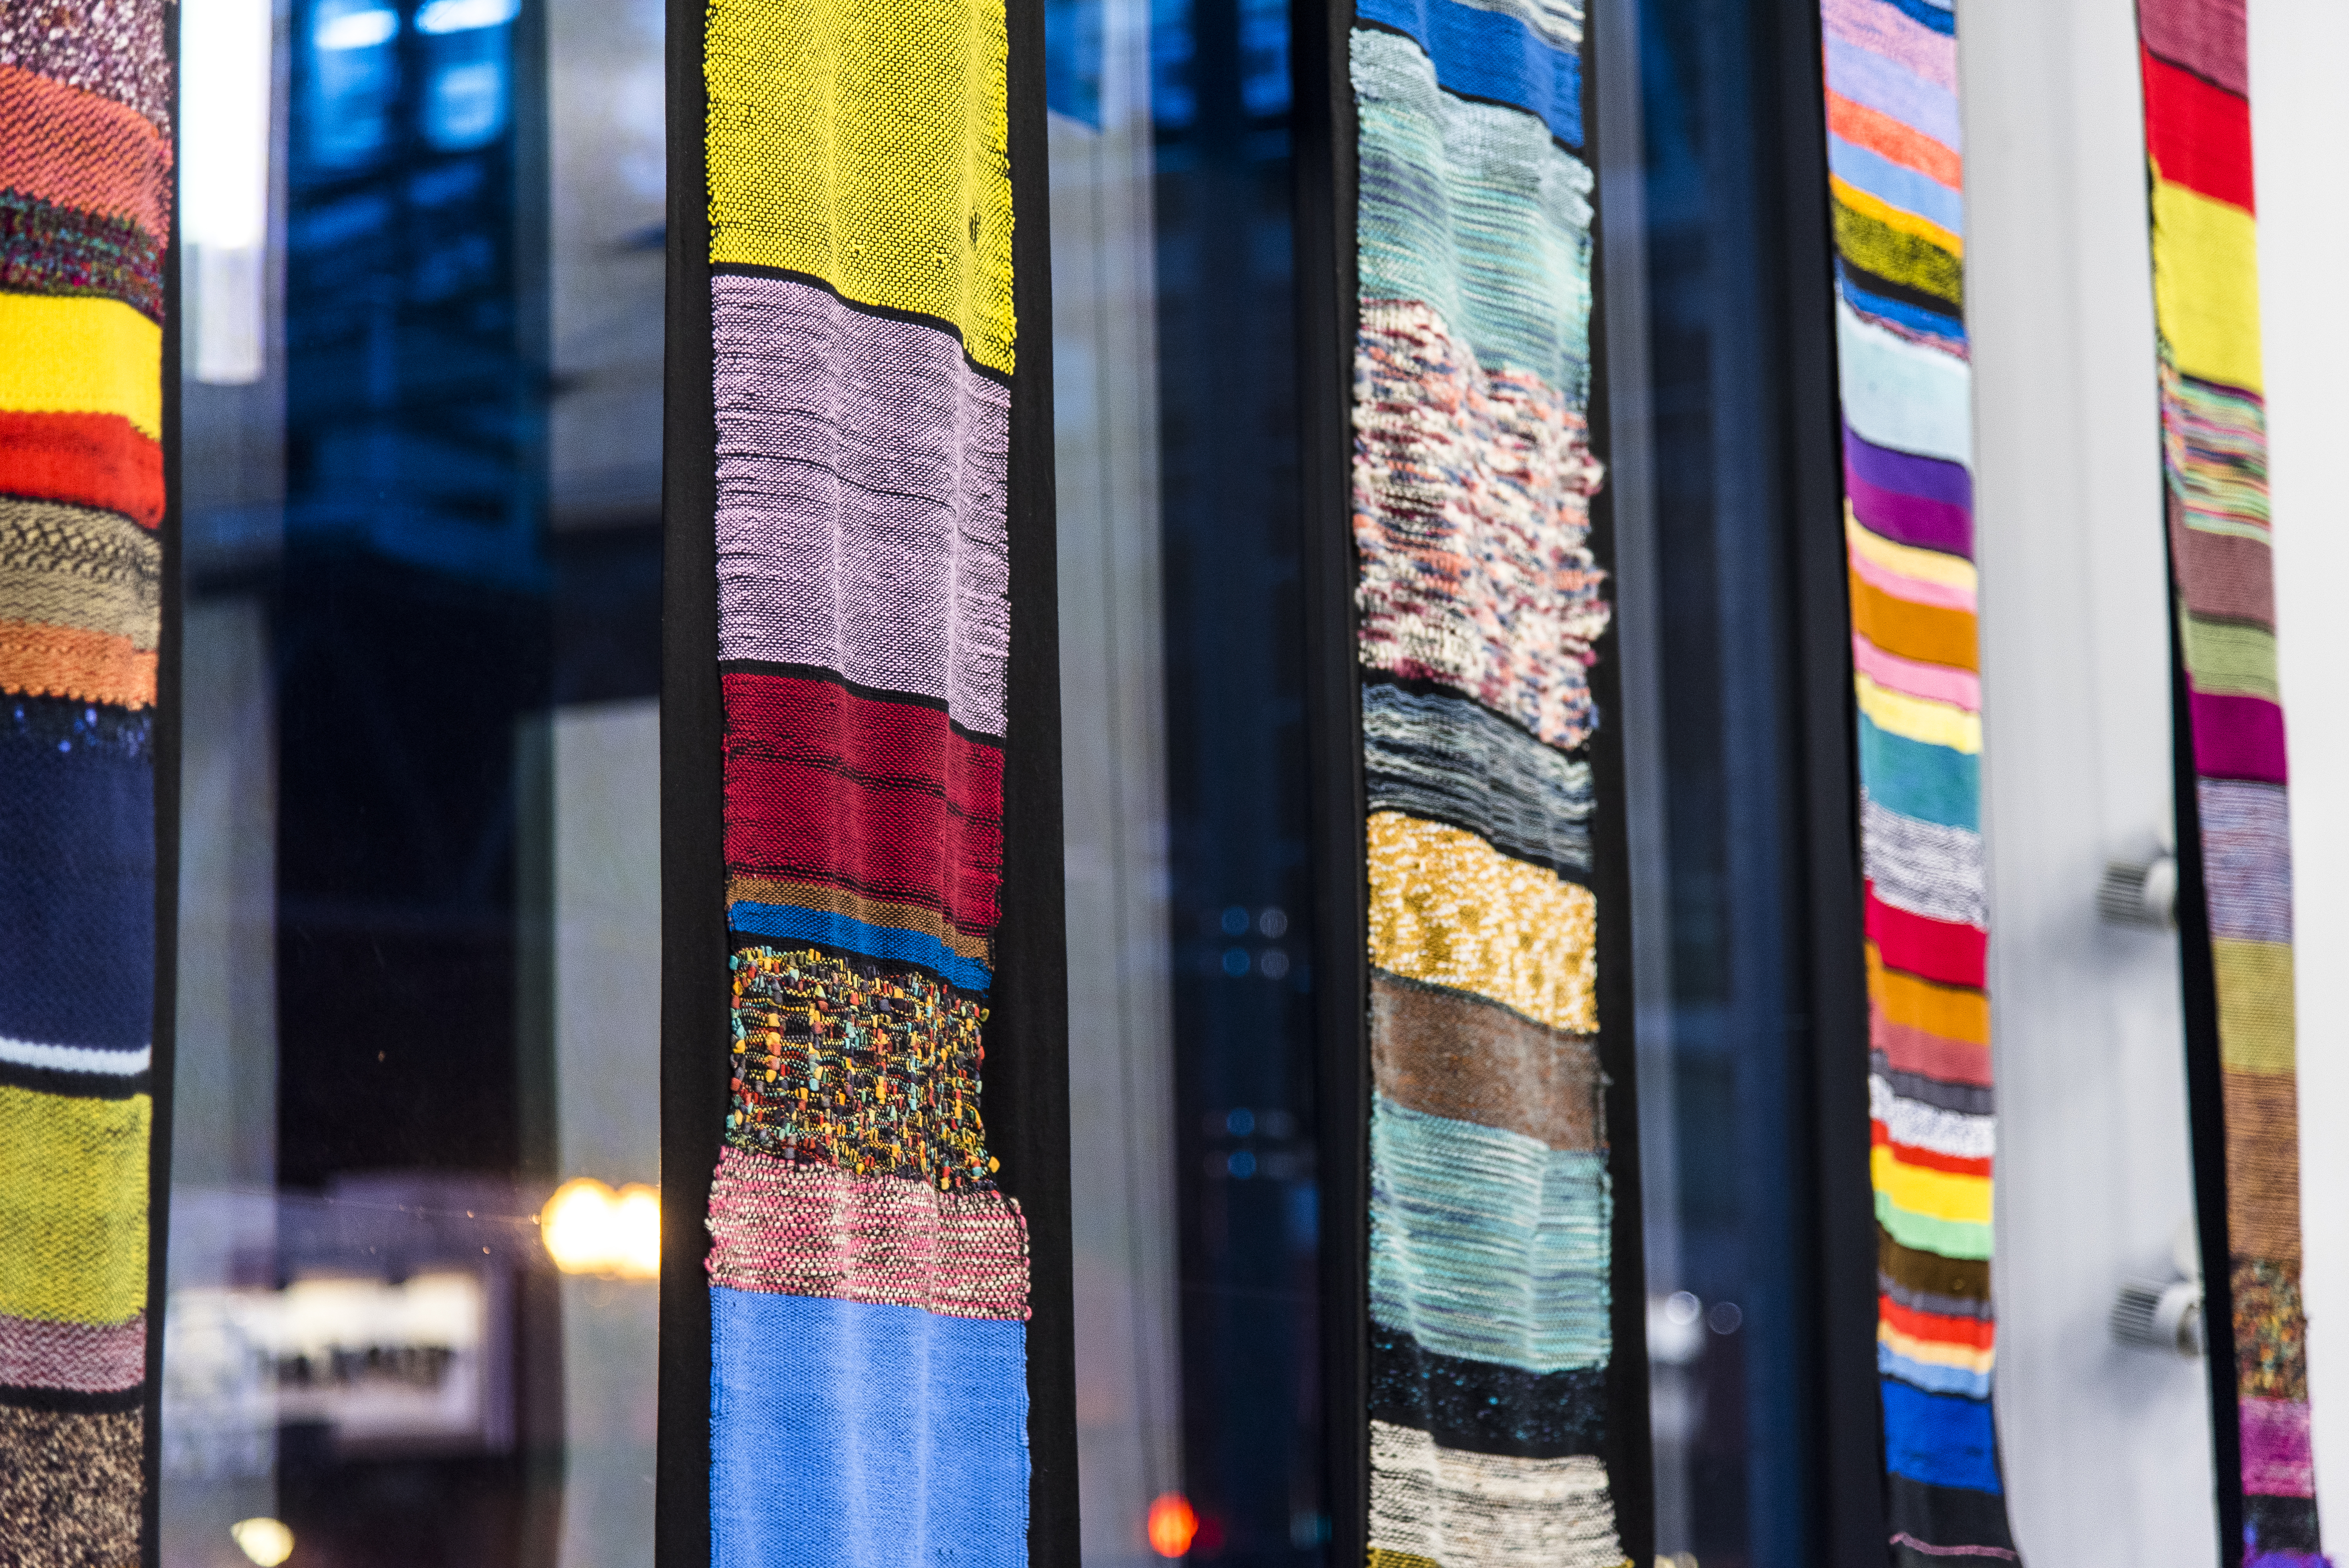 Woven Tapestries hanging in a window